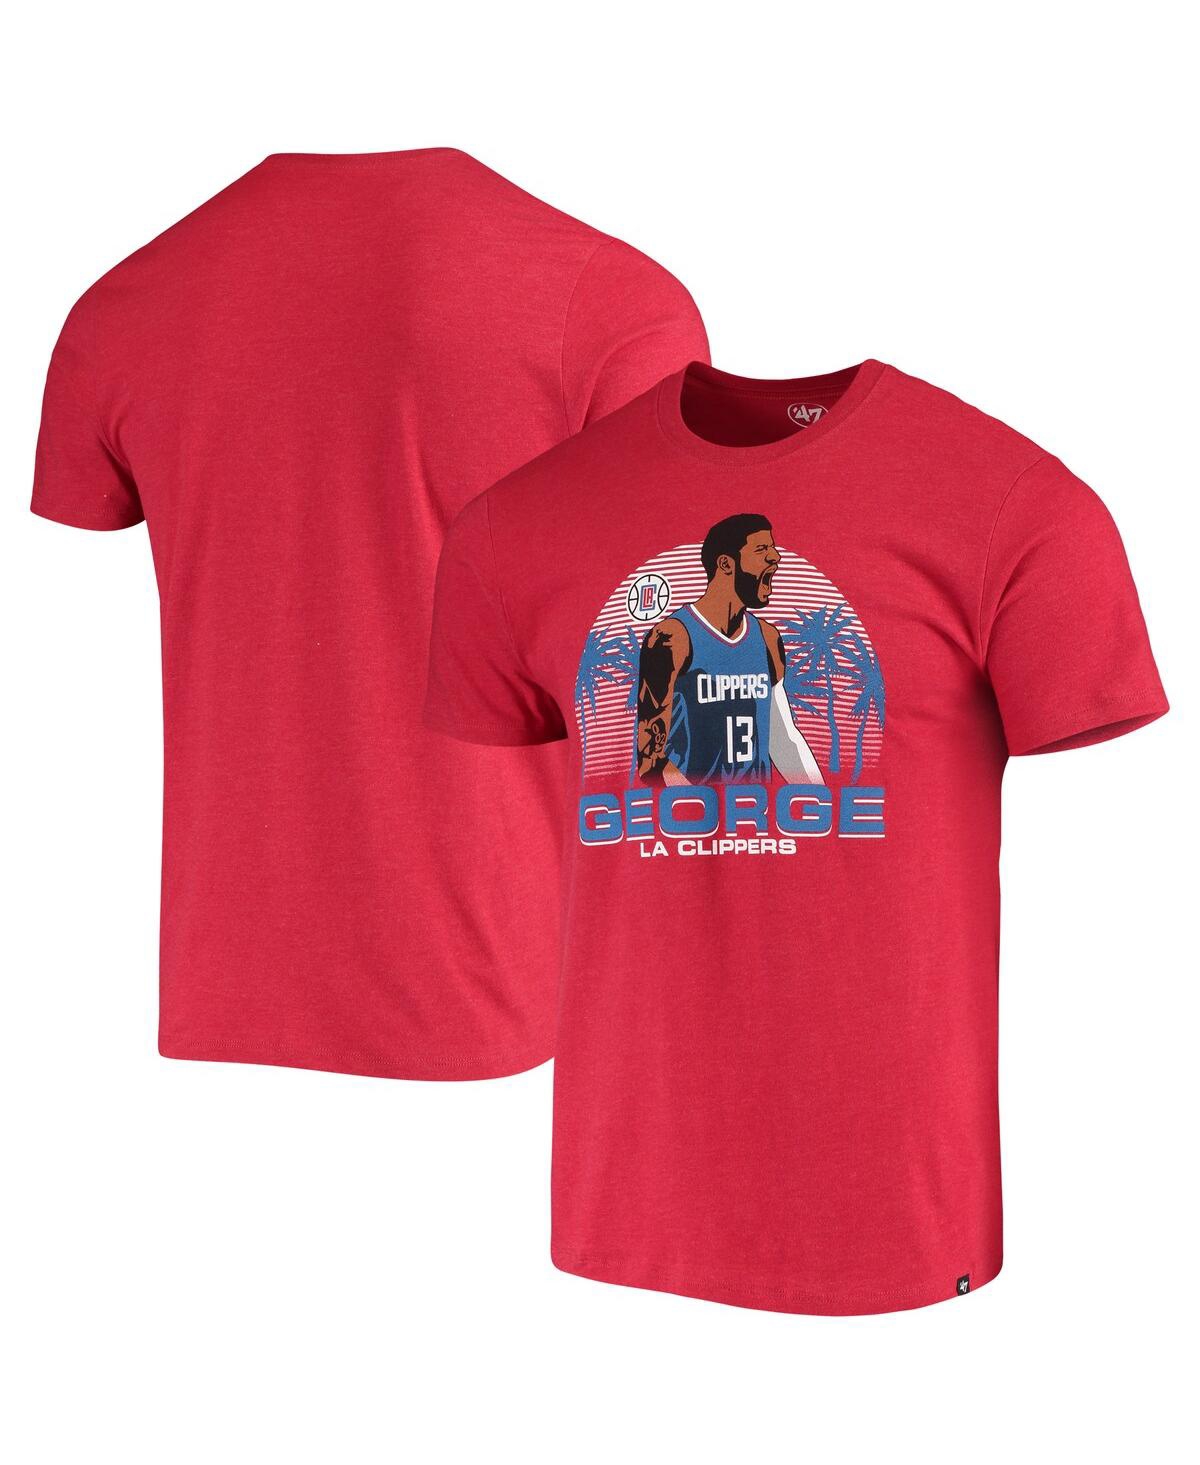 47 Brand Men's Paul George Red La Clippers Player Graphic T-shirt